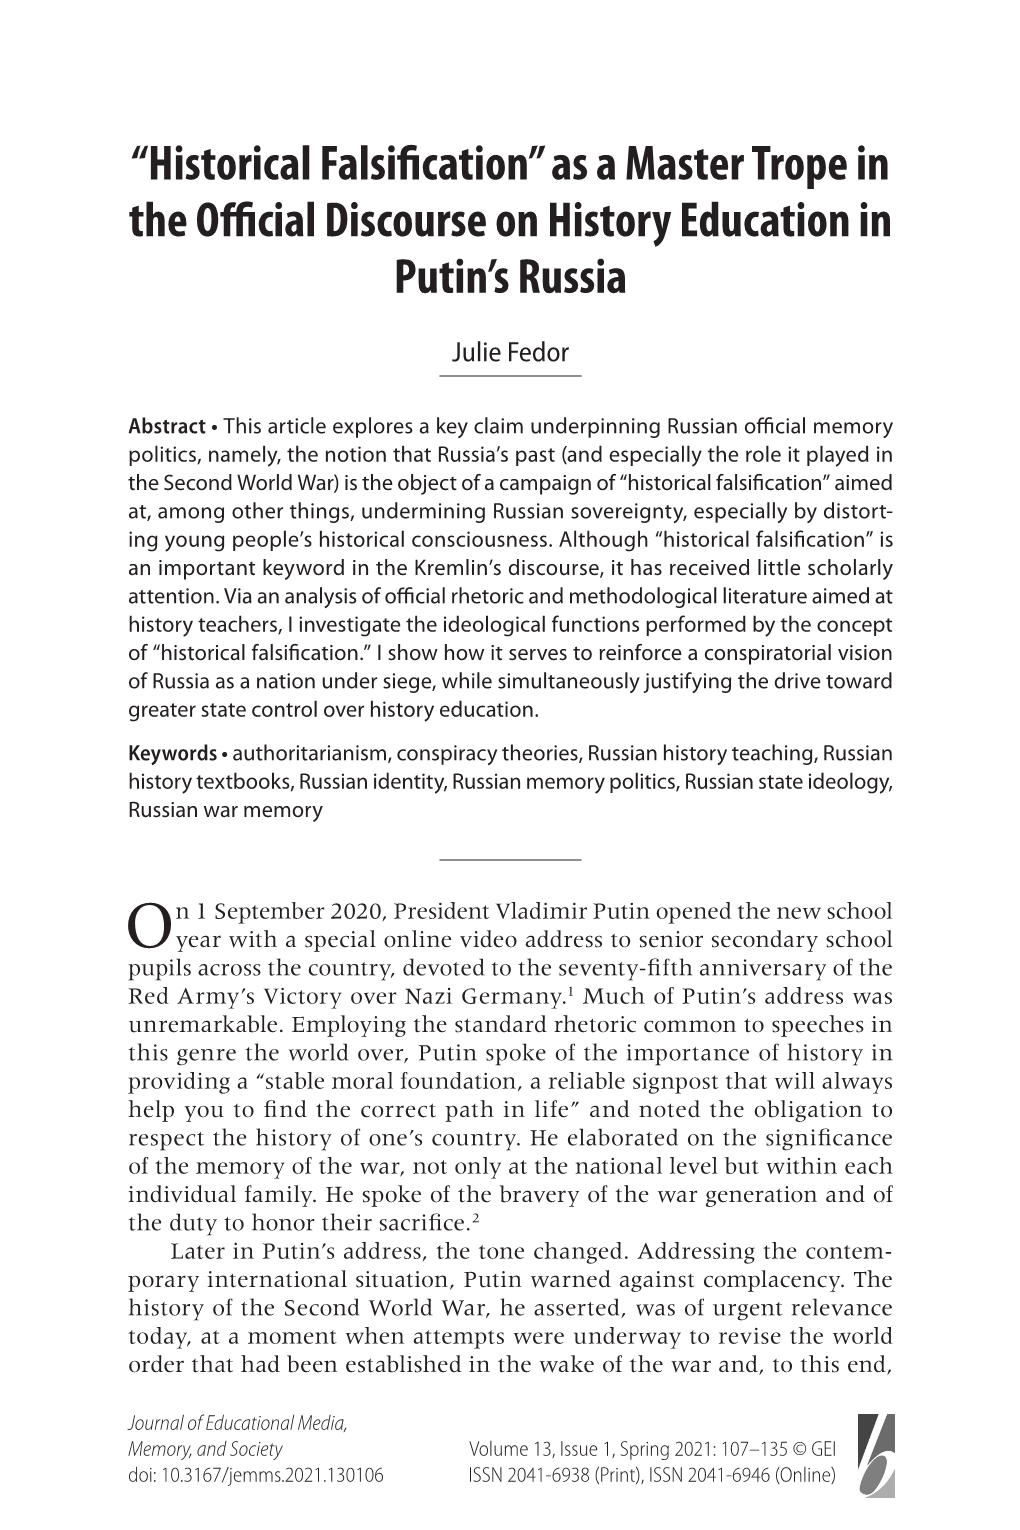 Historical Falsification” As a Master Trope in the Official Discourse on History Education in Putin’S Russia